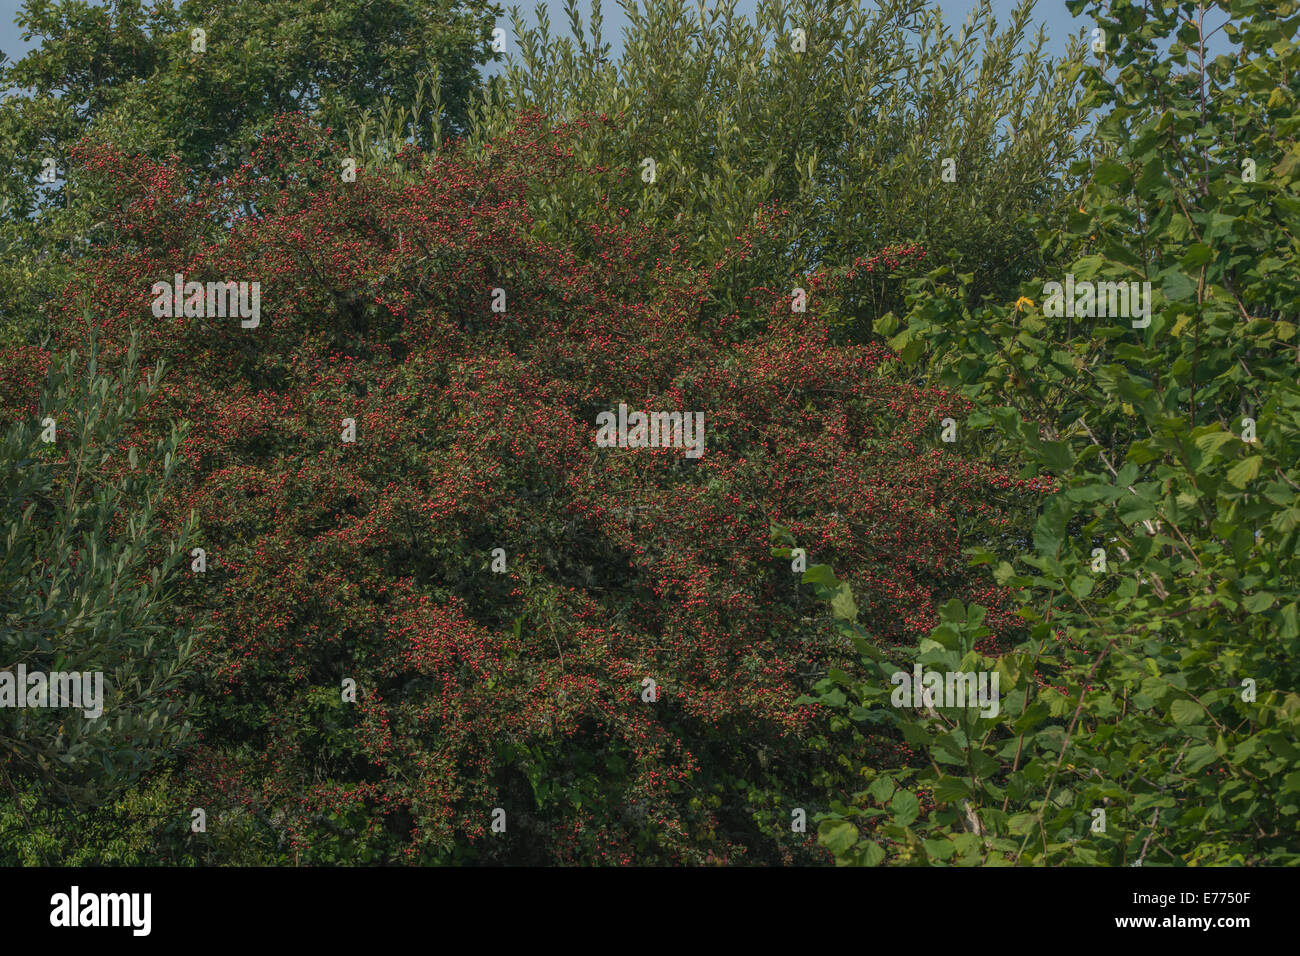 Hawthorn tree / Crataegus sp. shrub with autumnal red berries on branches. Stock Photo